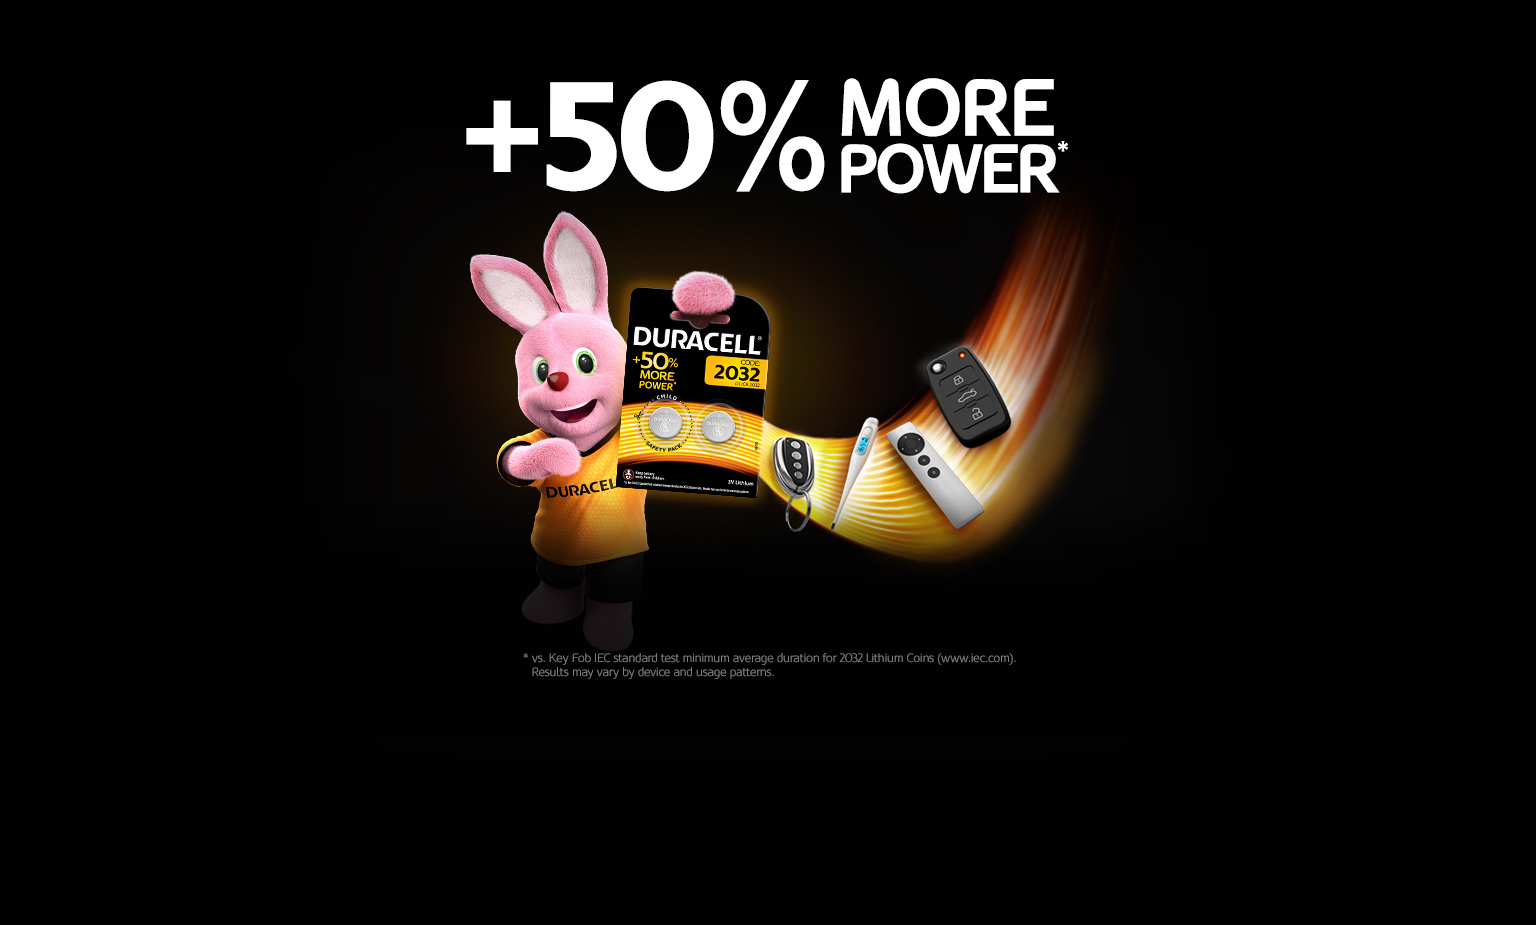 Duracell Coin batteries 2032 with 50% more power